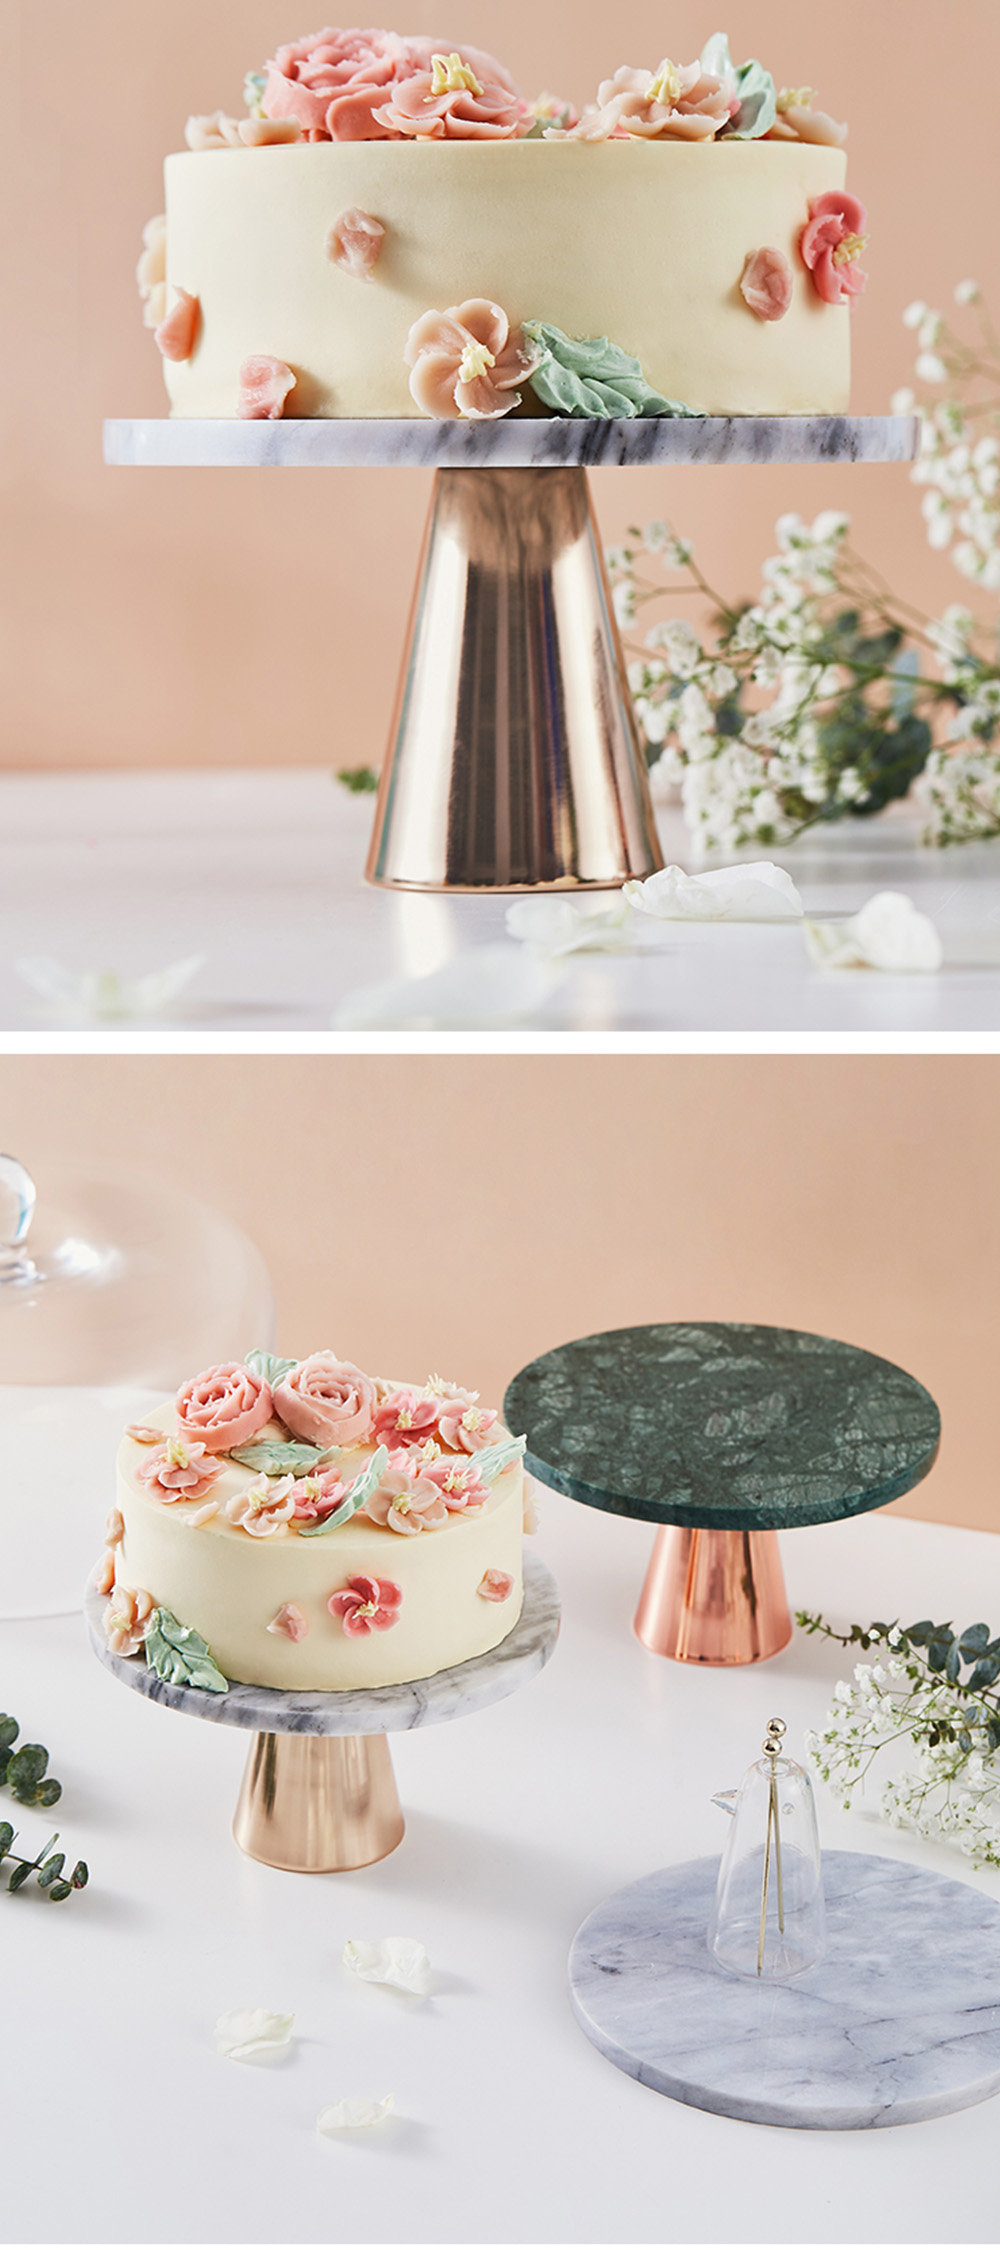 Cake Stands Food Photography Props | Food photography, Event catering, Food  photography props